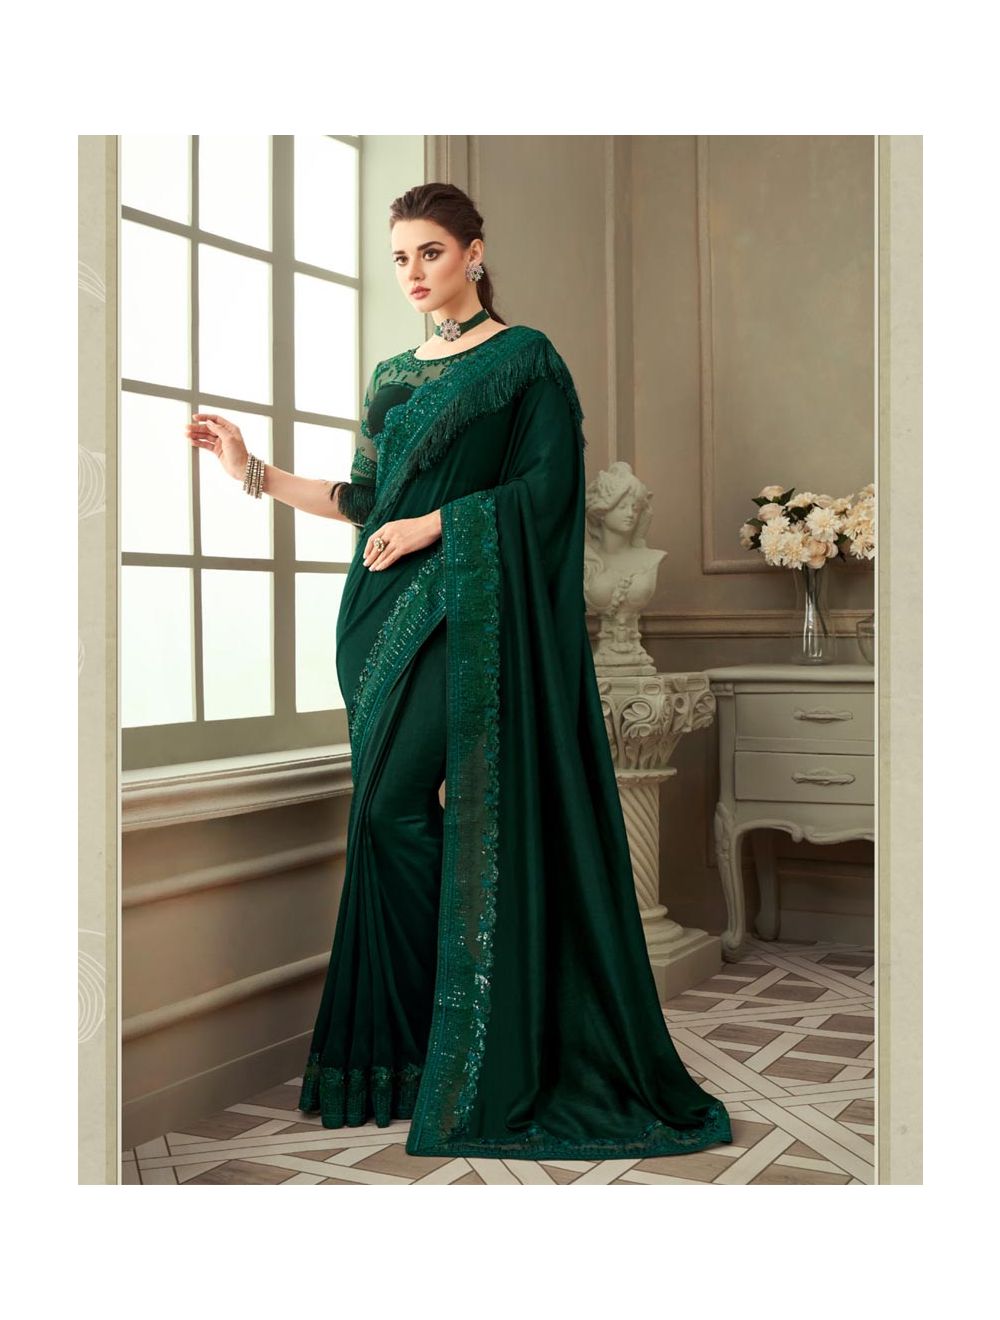 Buy Bottle Green Saree Gown With A Crepe Cowl Drape And Sheer Embroidered  Net Bodice With Colorful Resham Flowers Online - Kalki Fashion